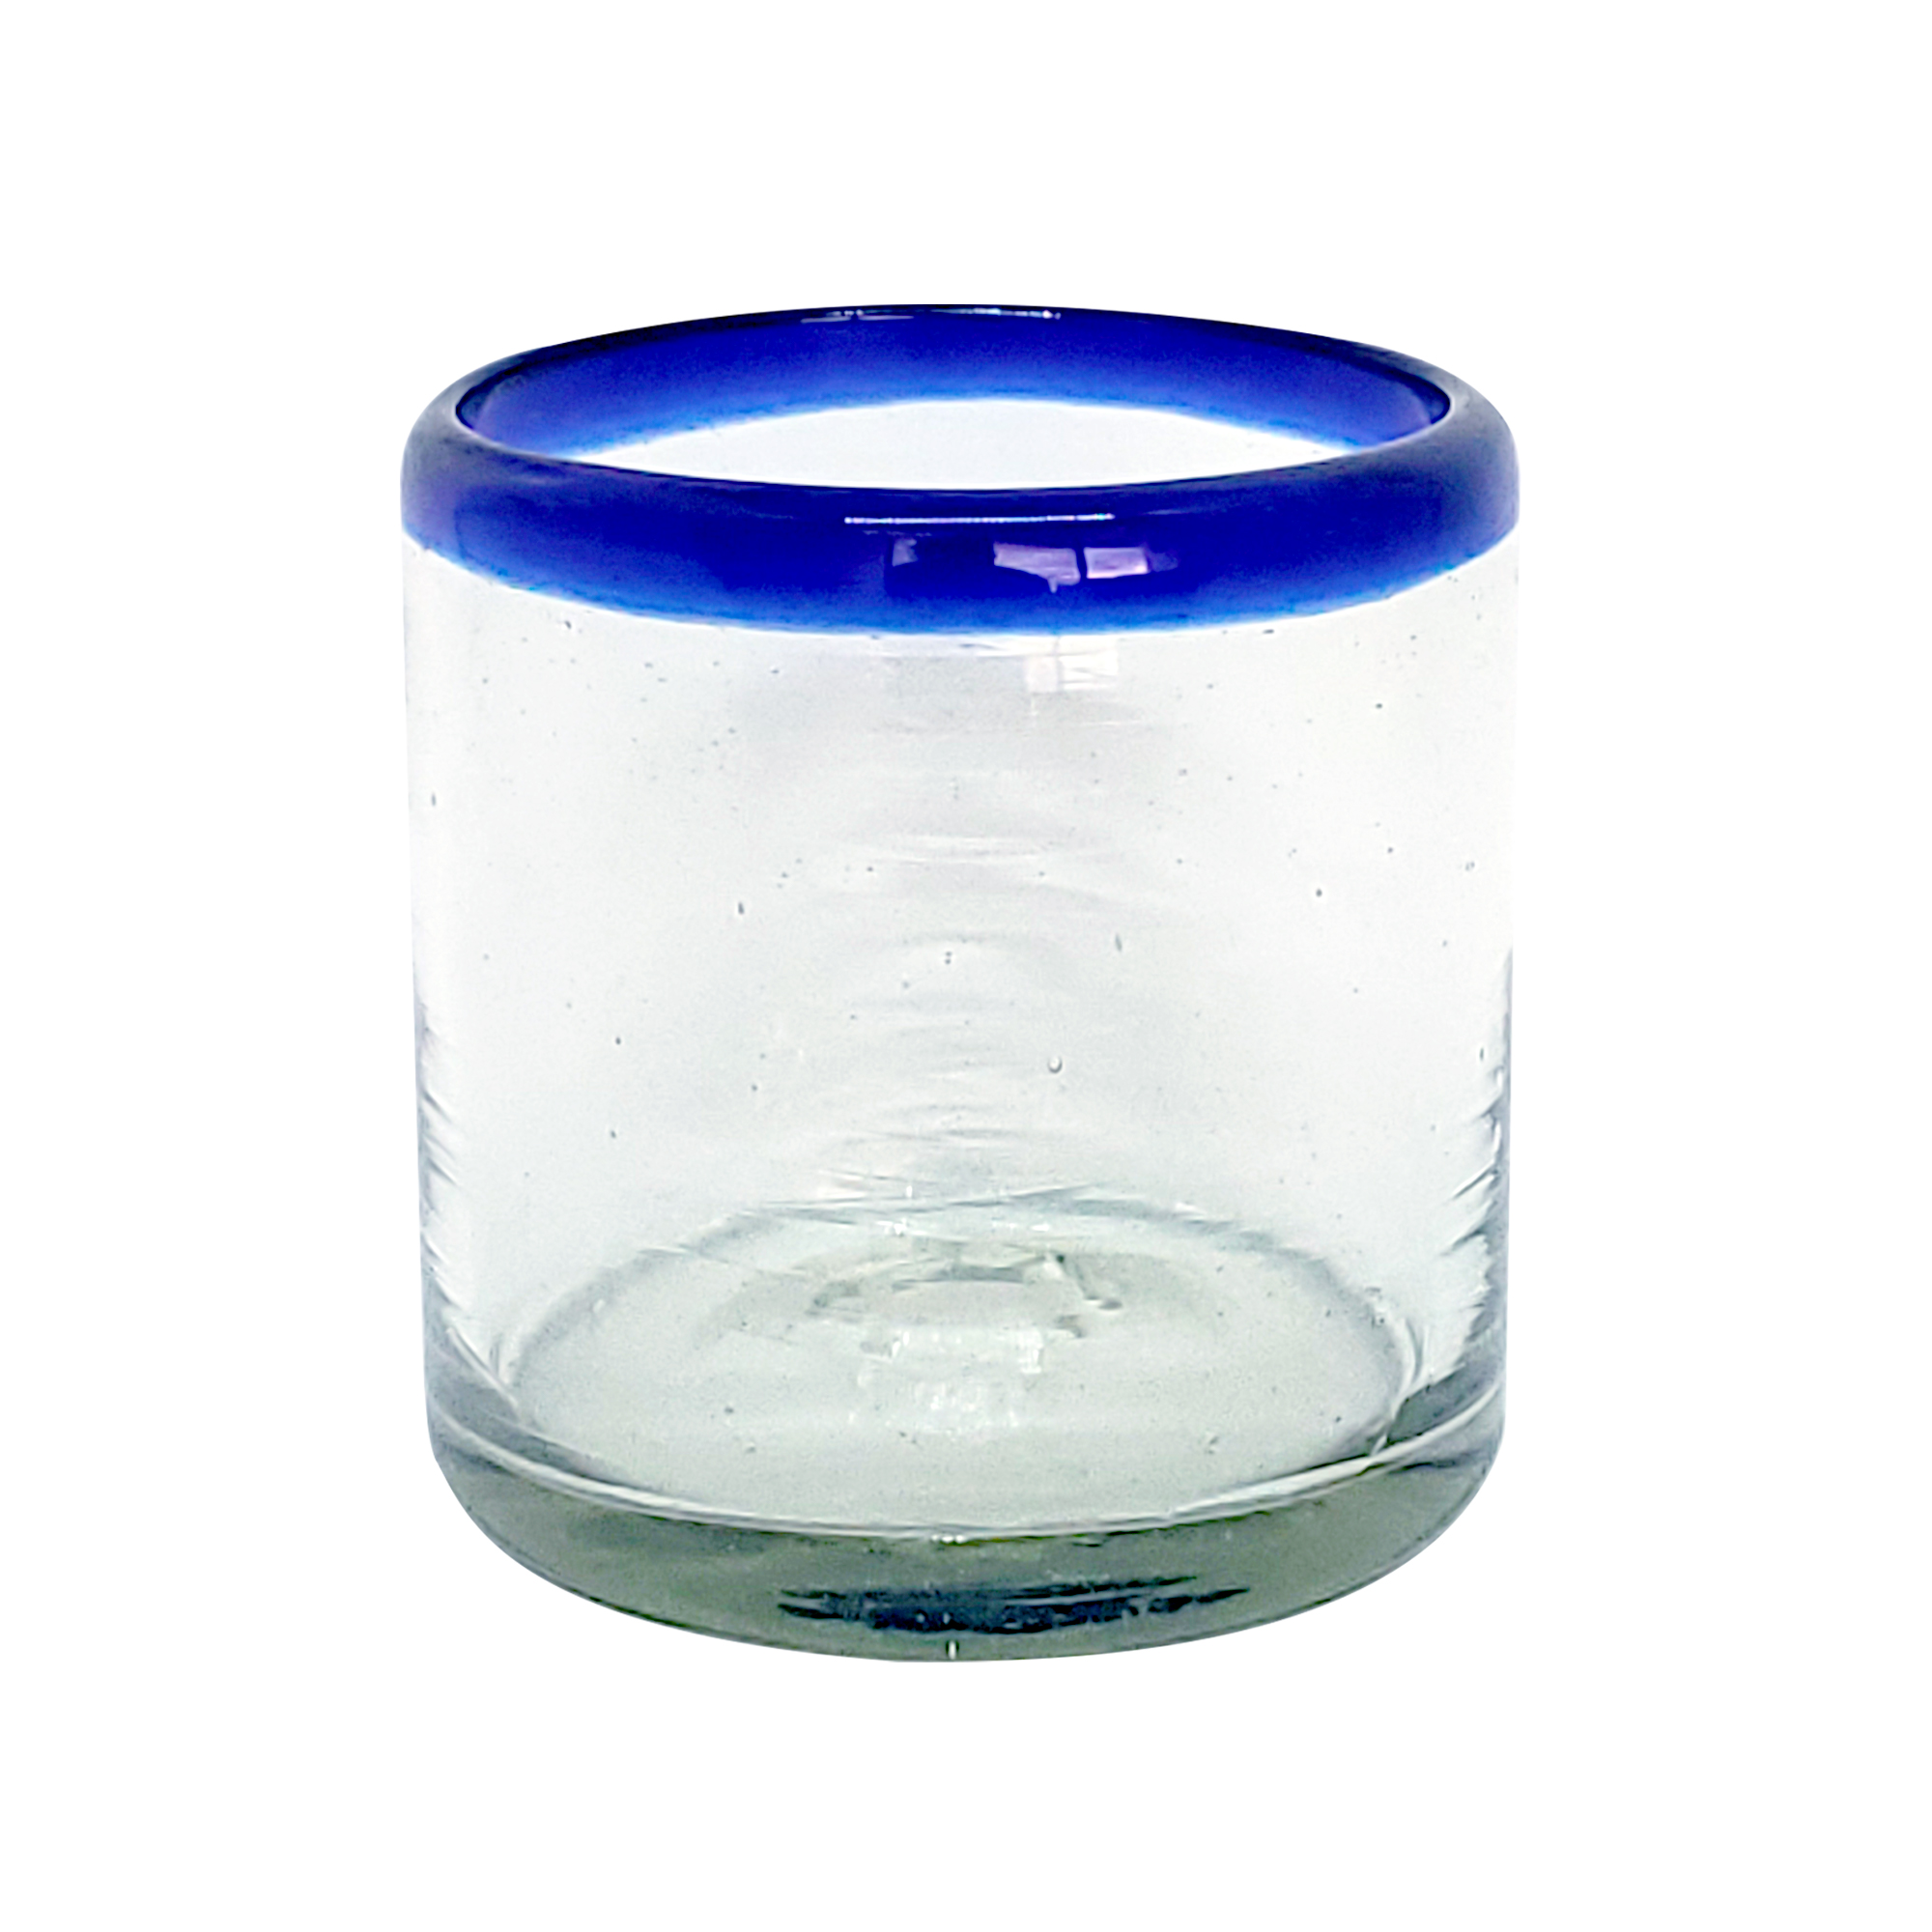 Wholesale Cobalt Blue Rim Glassware / Cobalt Blue Rim 8 oz DOF Rock Glasses  / These Double Old Fashioned glasses deliver a classic touch to your favorite drink on the rocks.<BR>1-Year Product Replacement in case of defects (glasses broken in dishwasher is considered a defect).